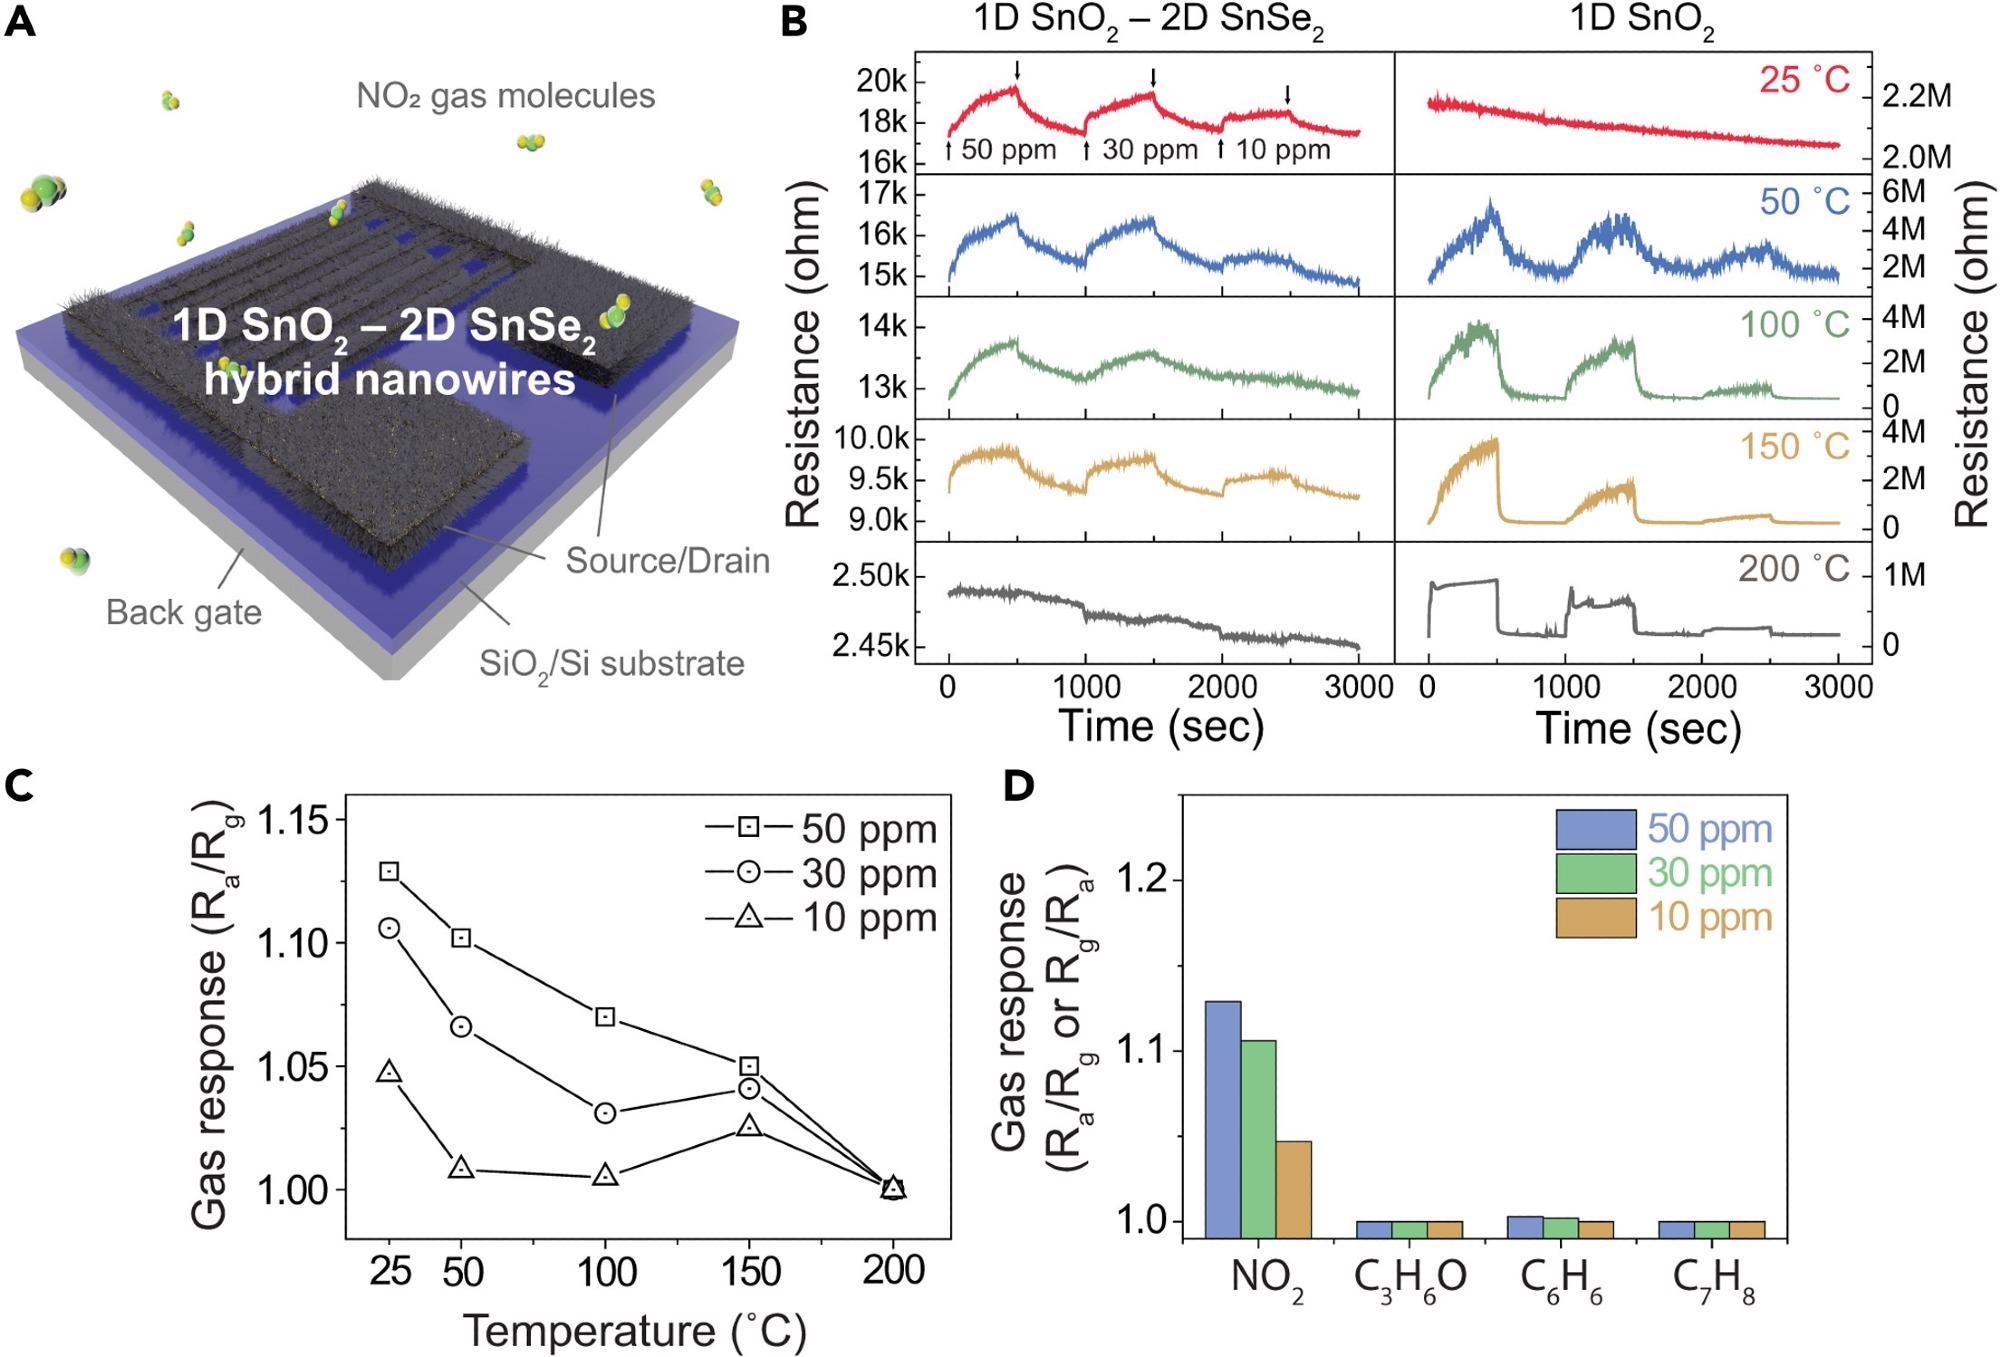 Gas sensing characteristics of 1D SnO2–2D SnSe2 hybrid nanowire network-based gas sensor forNO2 gas(A) Illustration of NO2 gas sensor based on SnO2 nanowires with ultrathin SnSe2.(B) Dynamic resistance curves of pristine SnO2 nanowires (right) and 1D SnO2–2D SnSe2 heterostructure (left)-based gas sensor to different NO2 gas concentrations of 10–50 ppm at different temperatures (room temperature – 200 °C).(C) Comparative analysis of NO2 gas sensitivity at different operating temperatures and gas concentrations of 10–50 ppm.(D) Comparison of gas sensing response of the 1D SnO2 nanowire–2D SnSe2 heterostructure-based gas sensor against various gases (NO2,C3H6O, C6H6,and C7H8) at different gas concentration from 10 to 50 ppm.